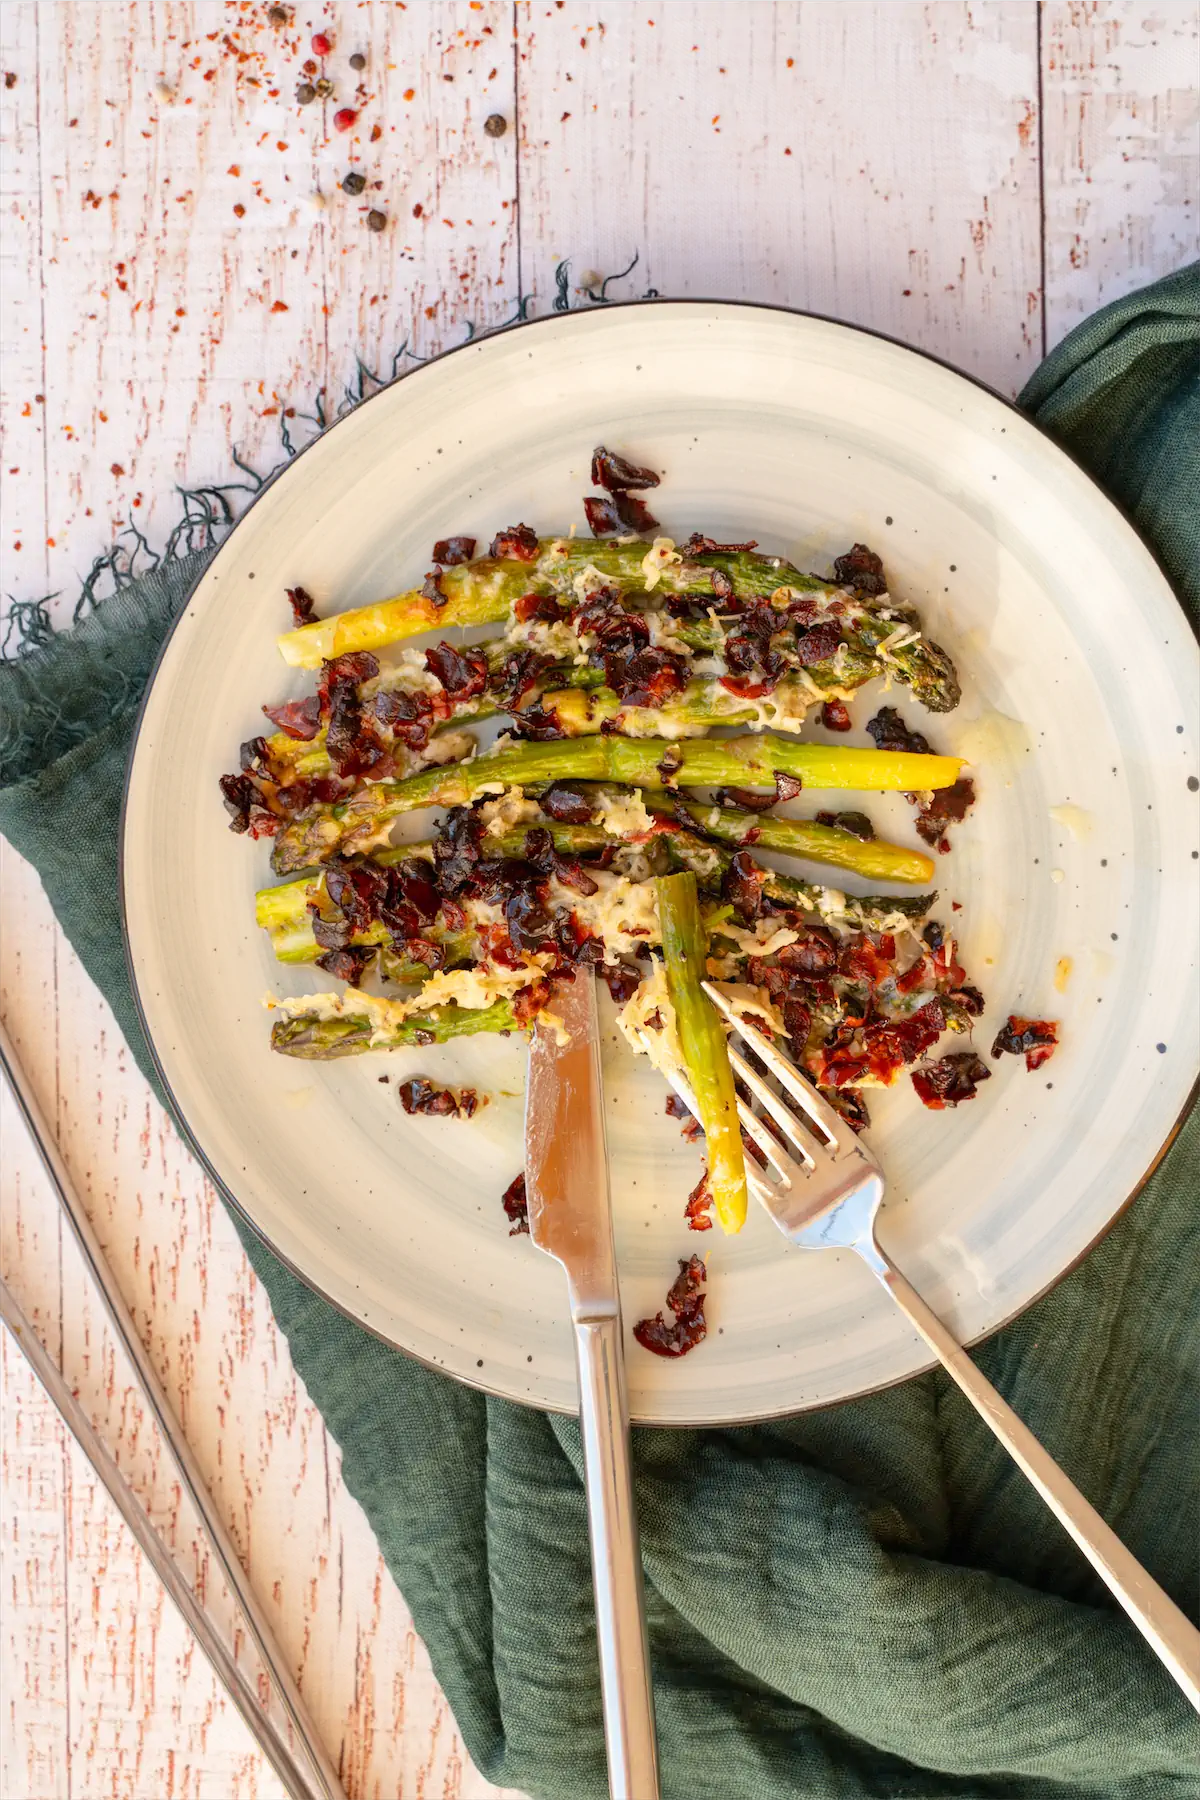 Low carb and homemade roasted asparagus with bacon crumbs and parmesan cheese.